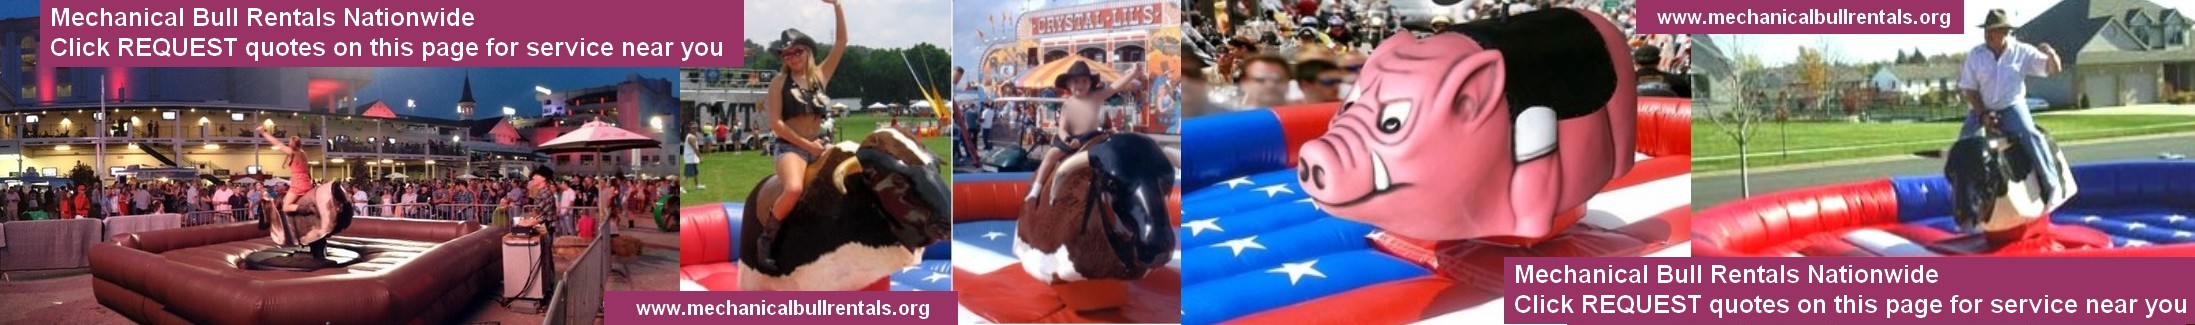 Mechanical Bull Rentals Odessa Texas TX and near you. Free referrals to local mechanical bull companies LOGO